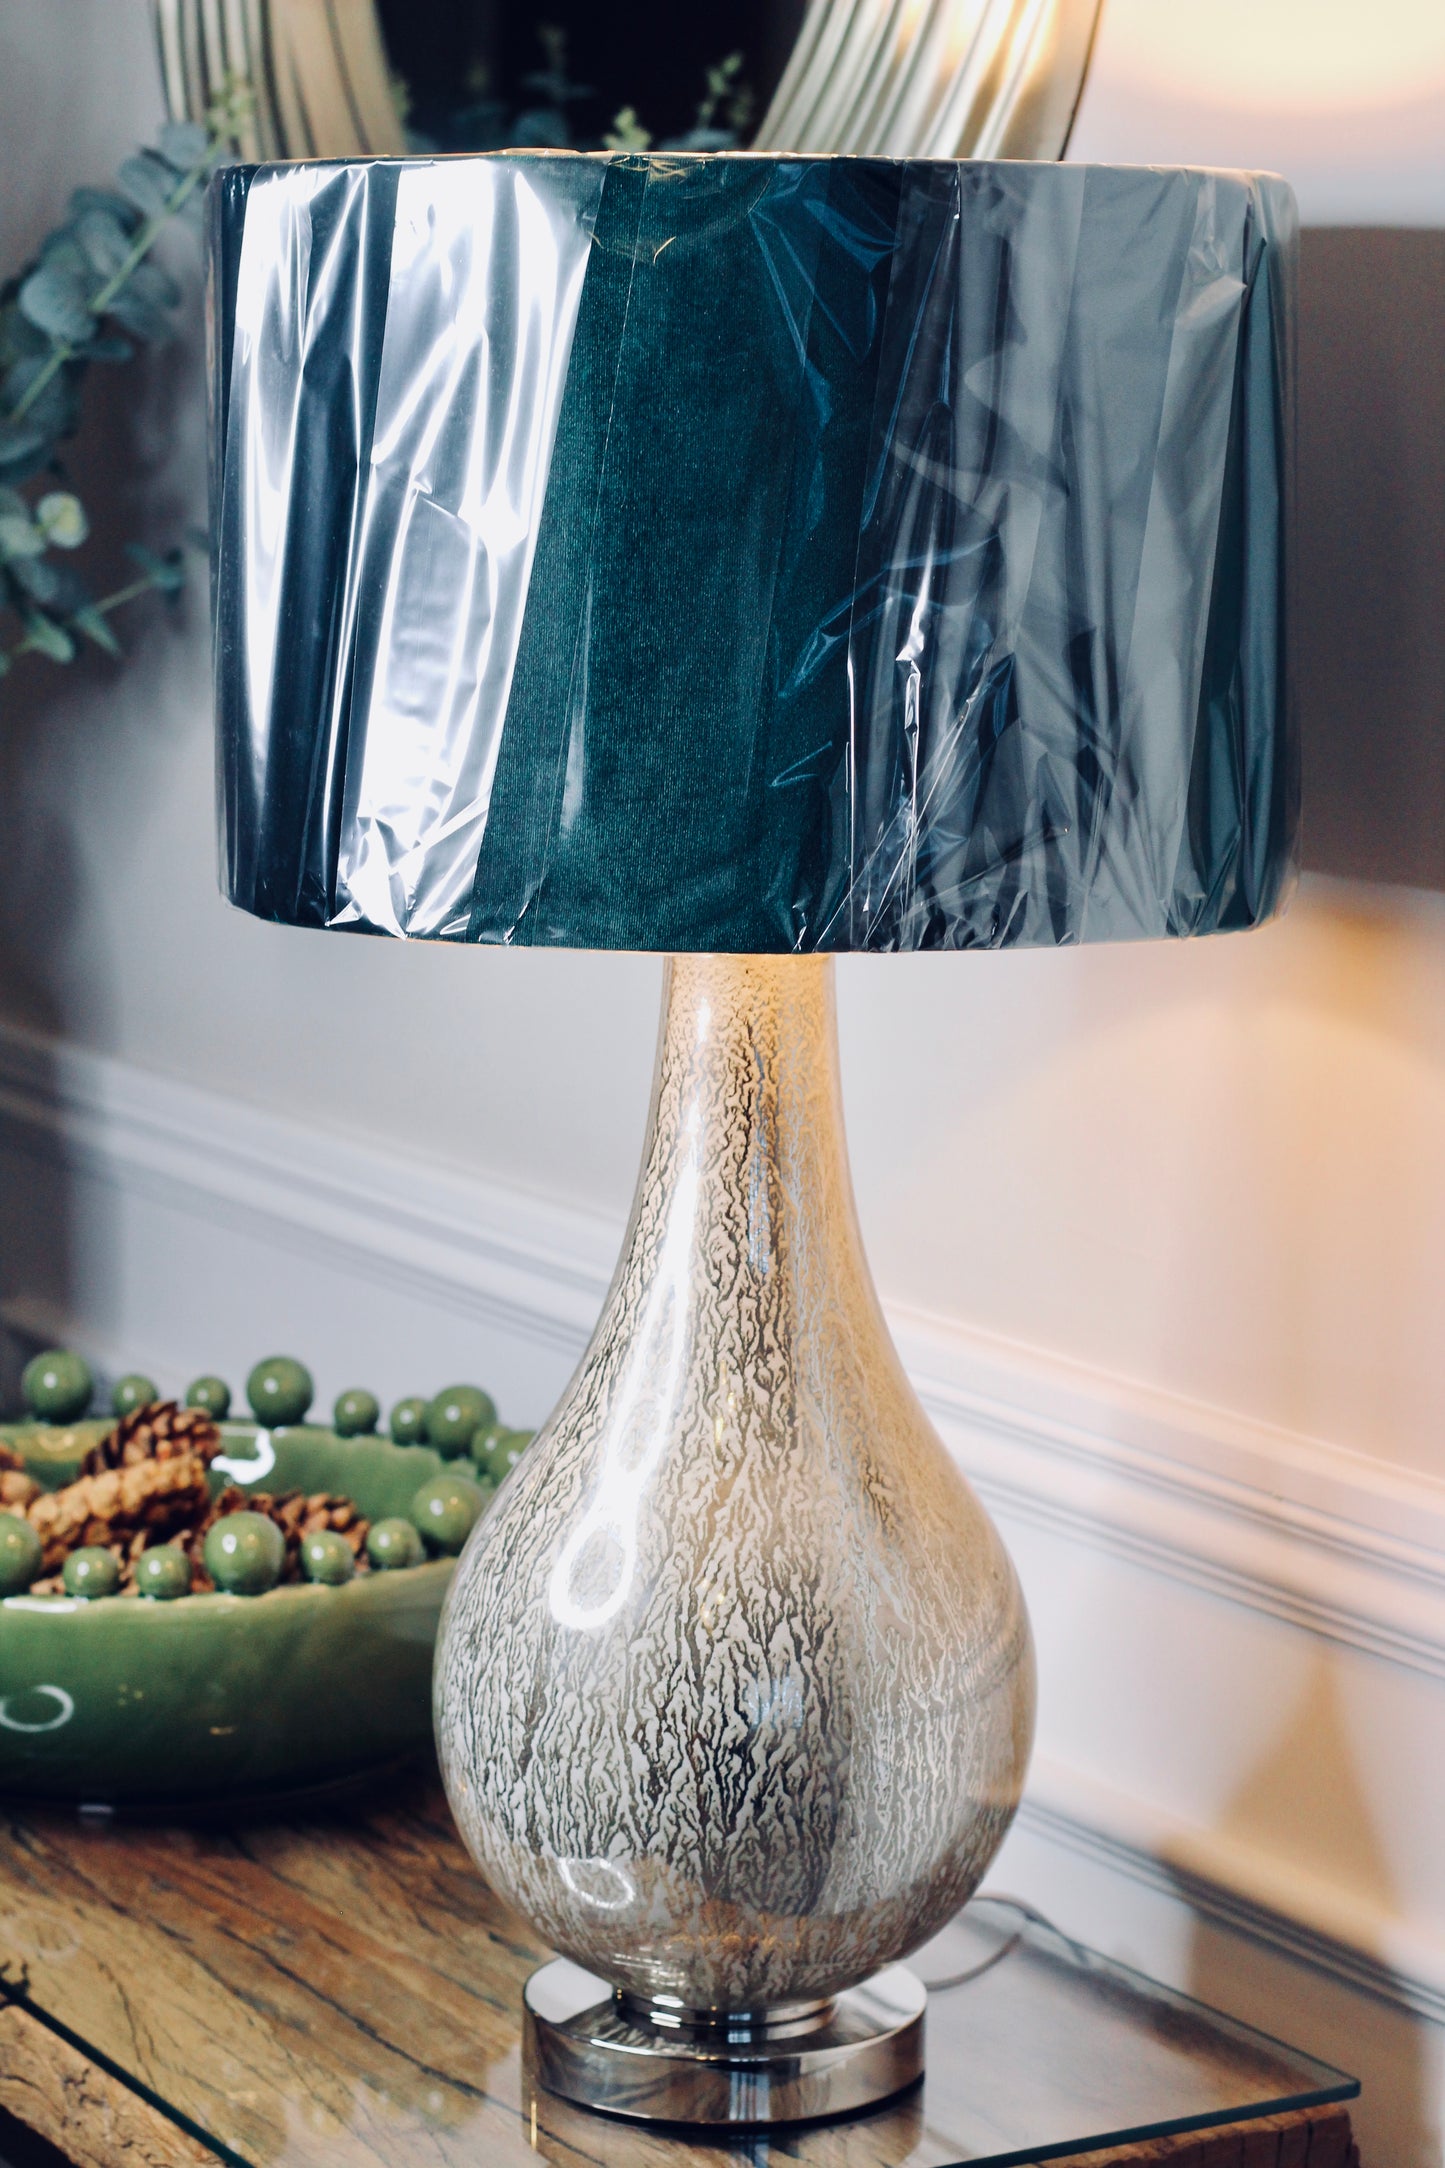 Pearly White Table Lamp Green Shade